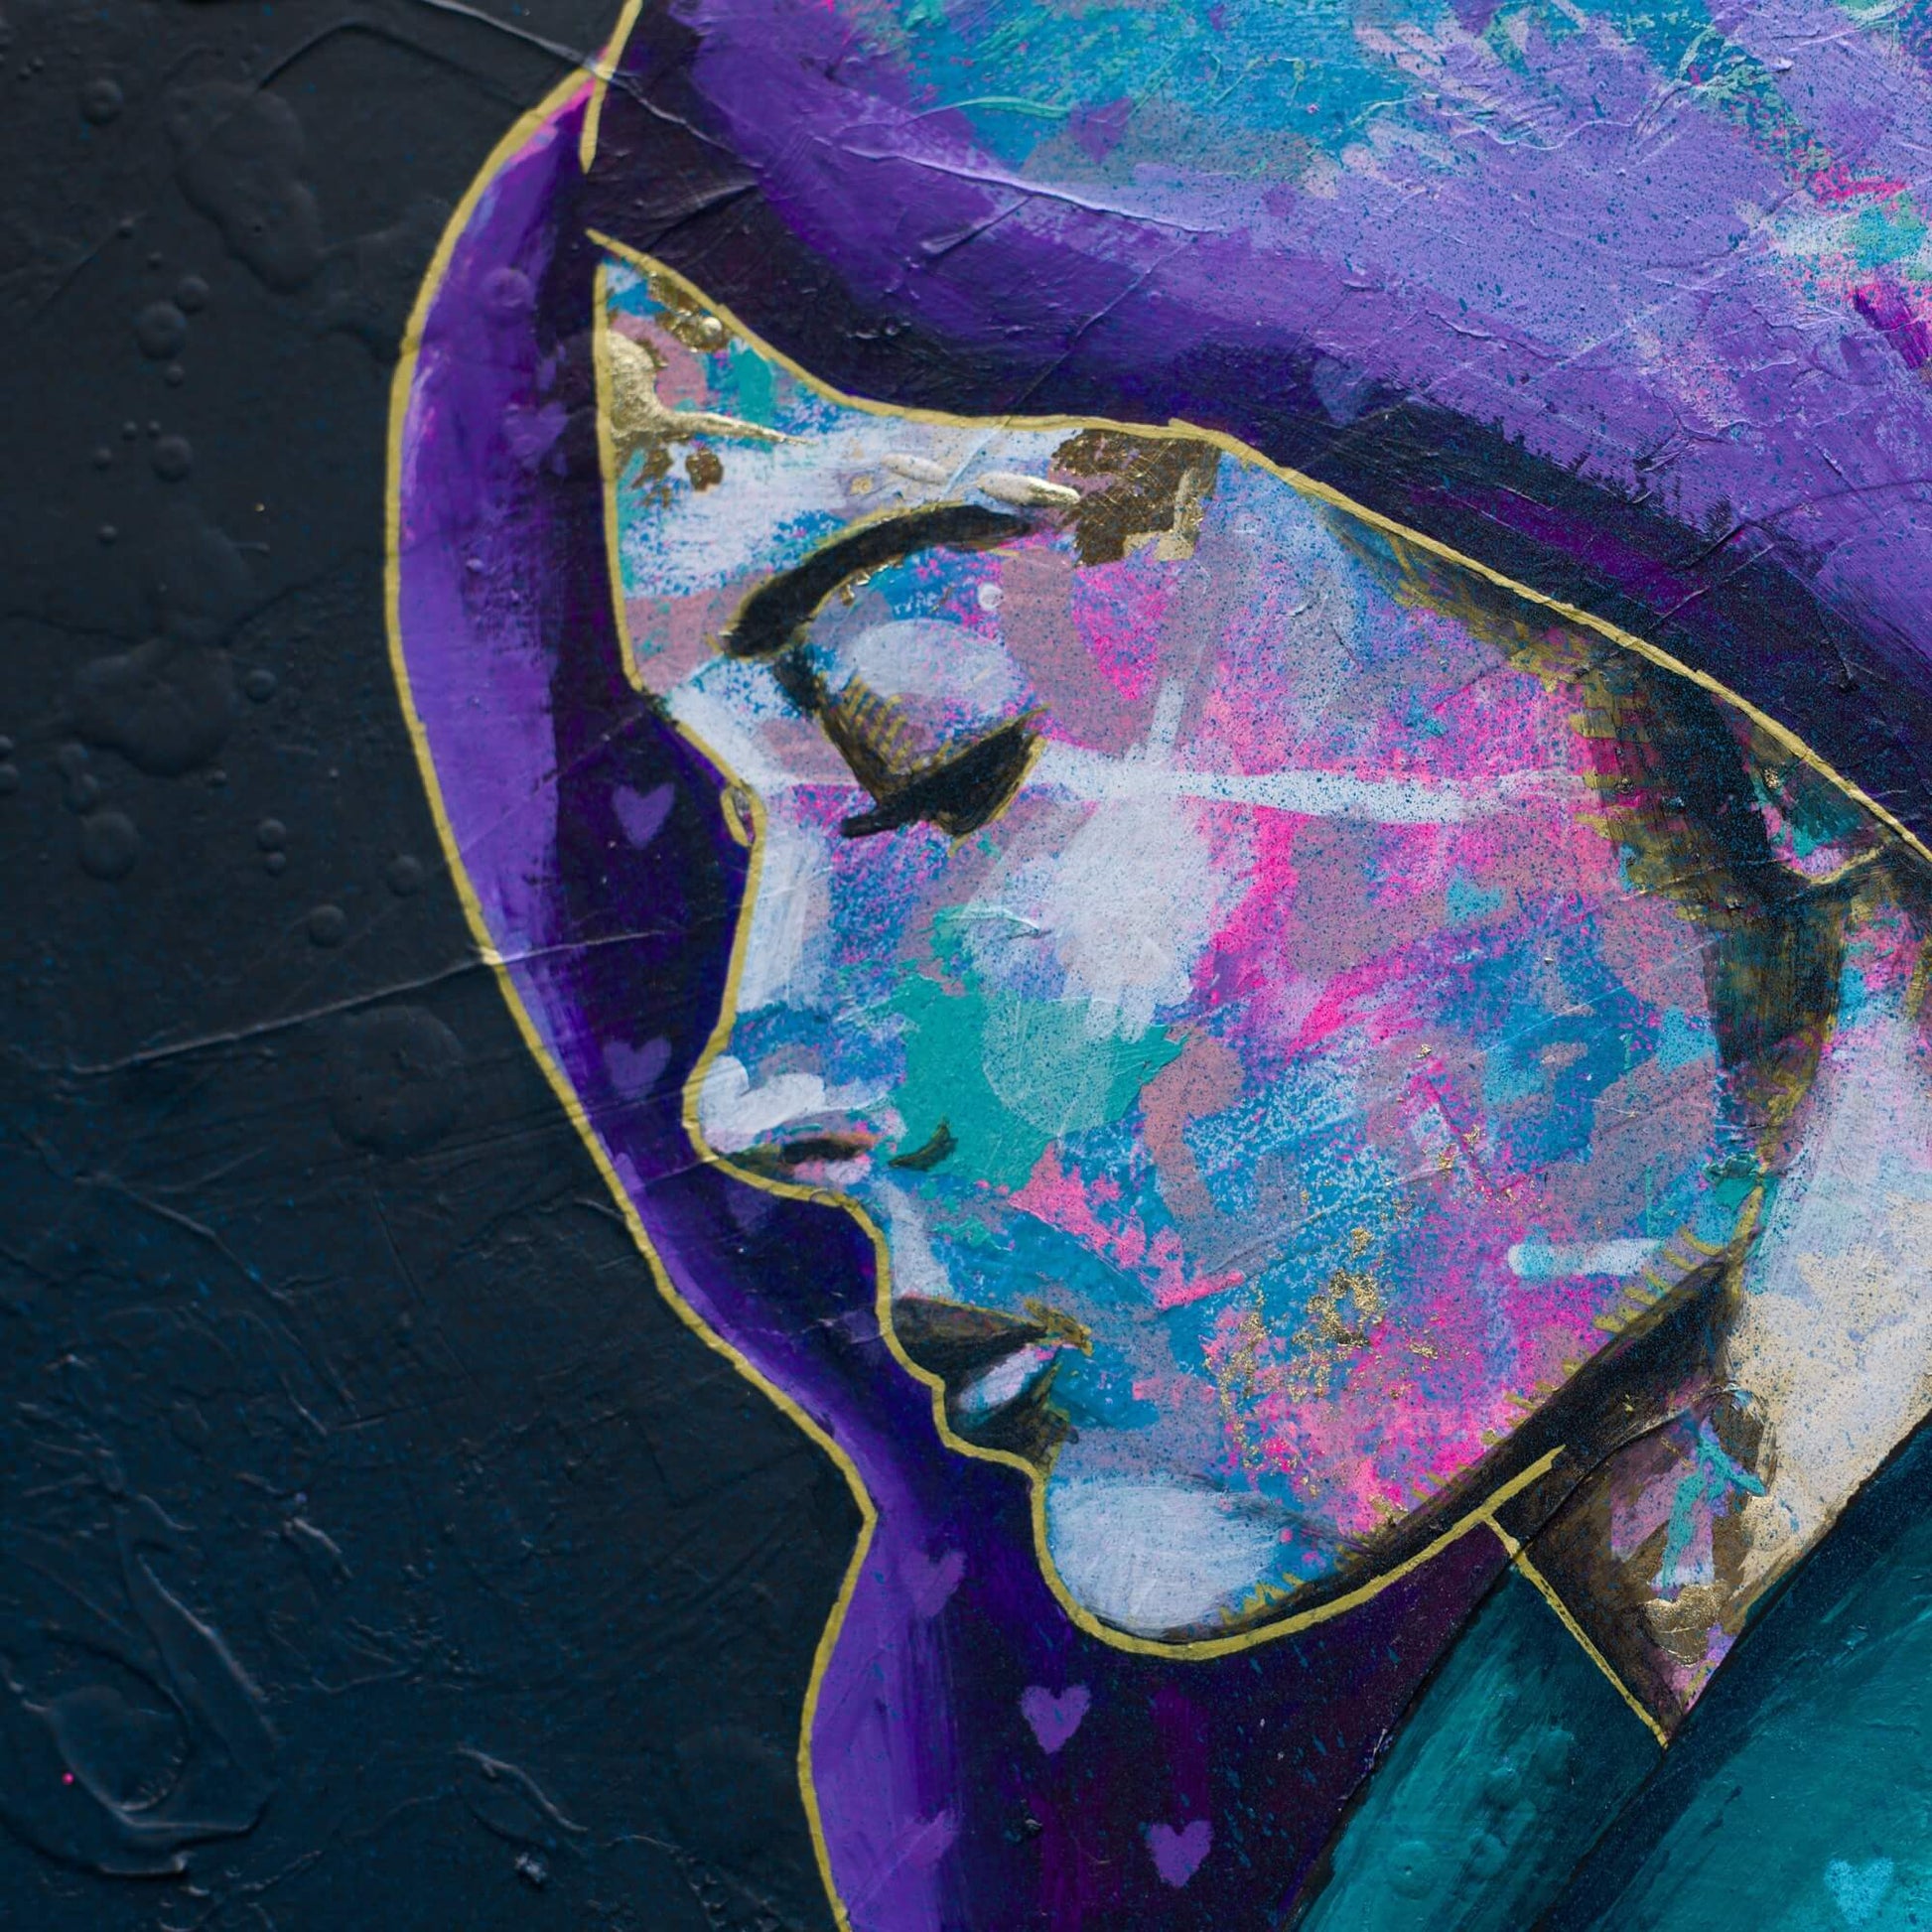 Artwork for Sale – Mini Painting of Woman -Green Purple & Gold  - 'Blue Moon' – Art Wall Painting Criss Chaney